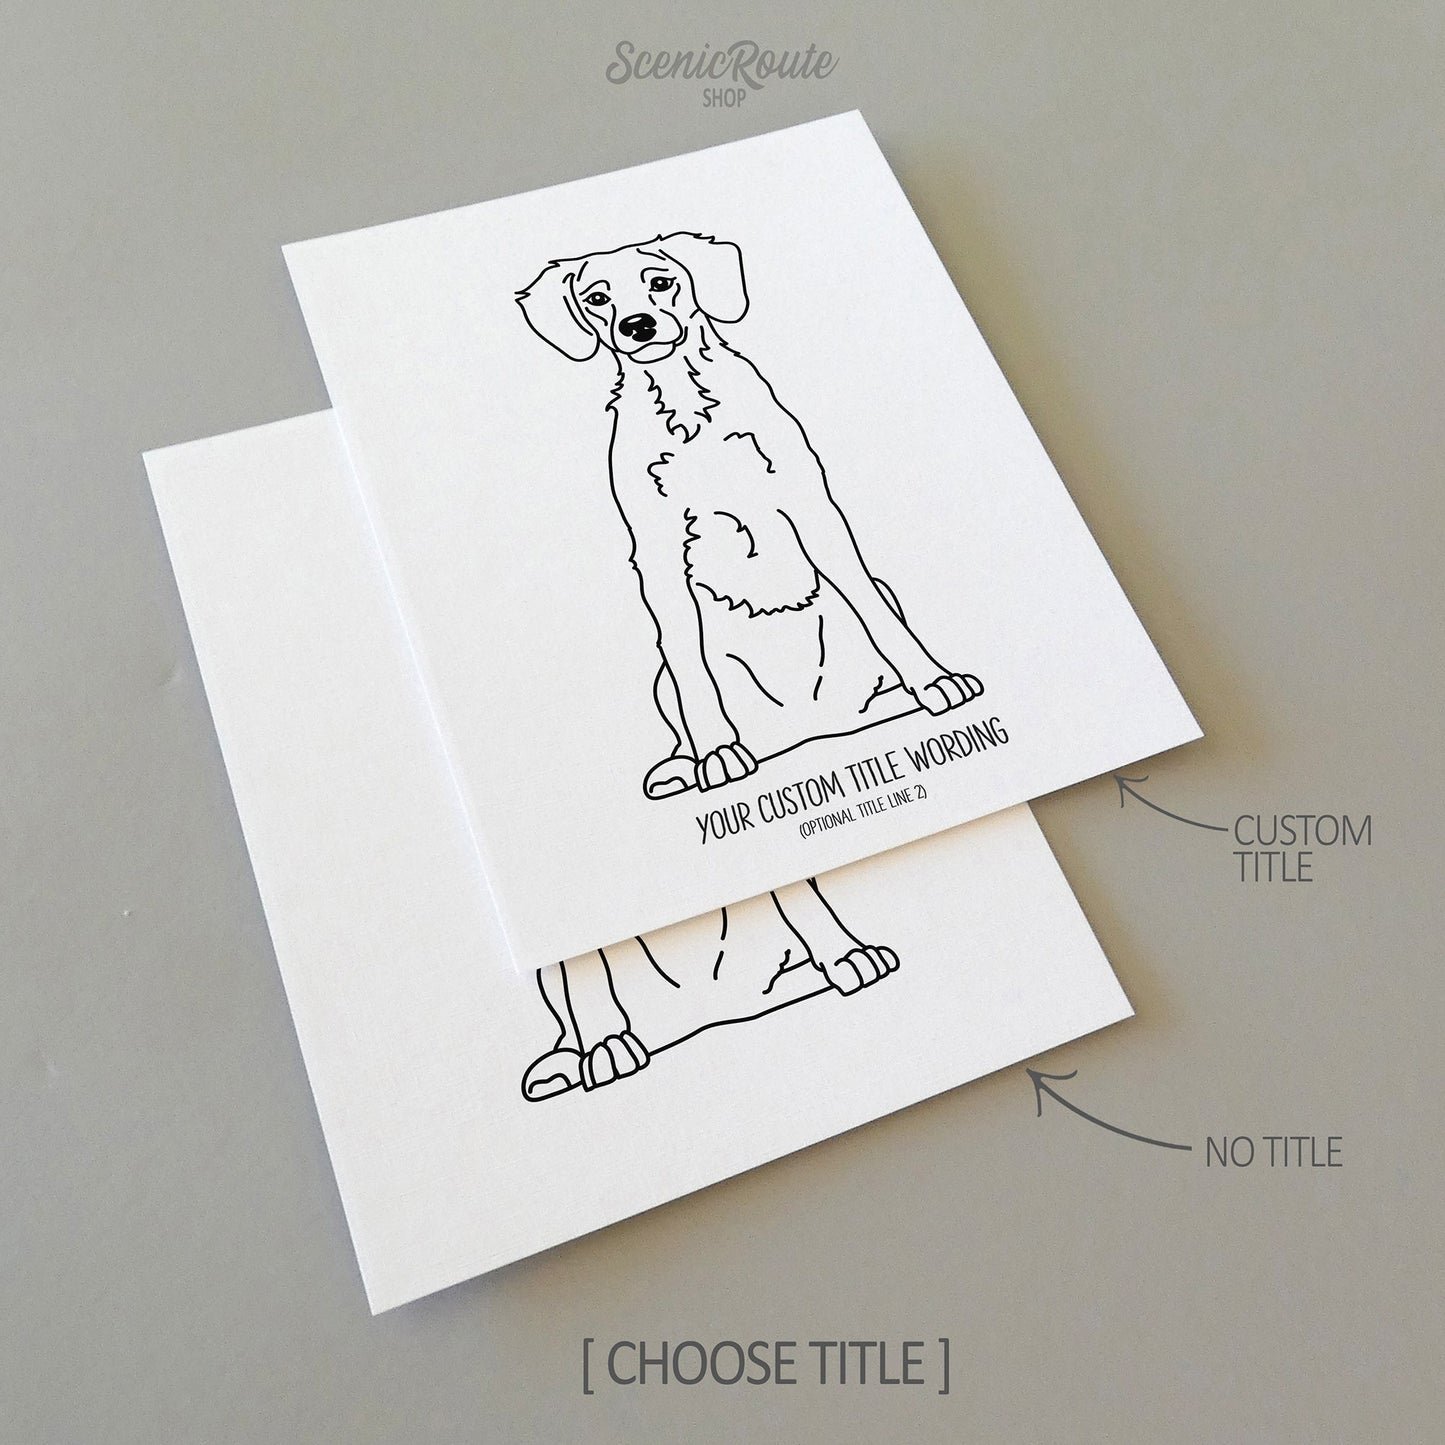 Two drawings of a Brittany Spaniel dog on white linen paper with a gray background.  Pieces are shown with “No Title” and “Custom Title” options to illustrate the available art print options.